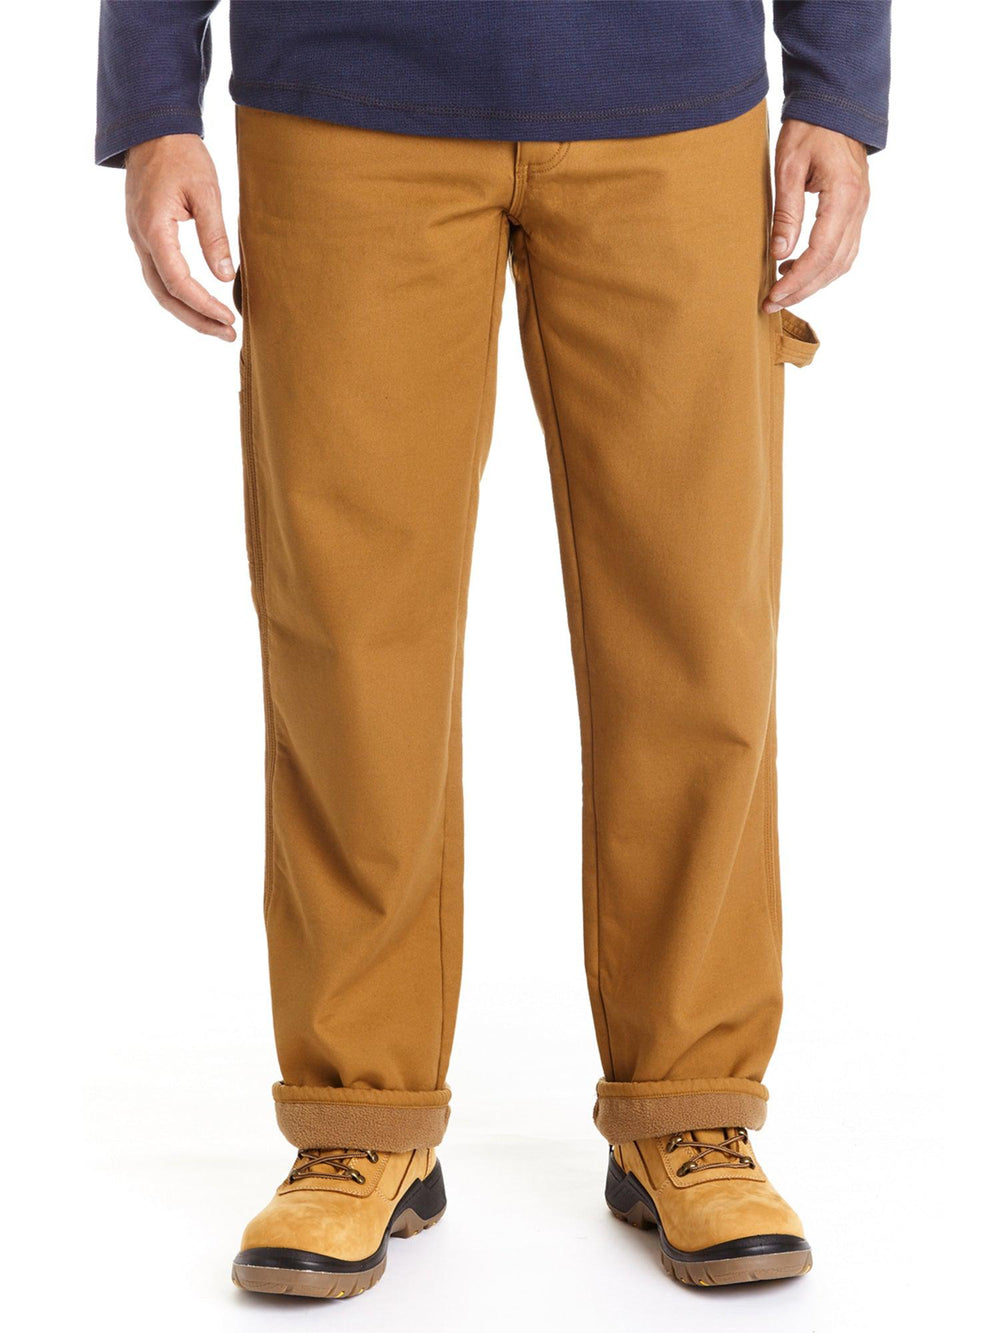 Stanley fleece lined cargo work pants what are you doing?taupe brown 36x30  in 2023